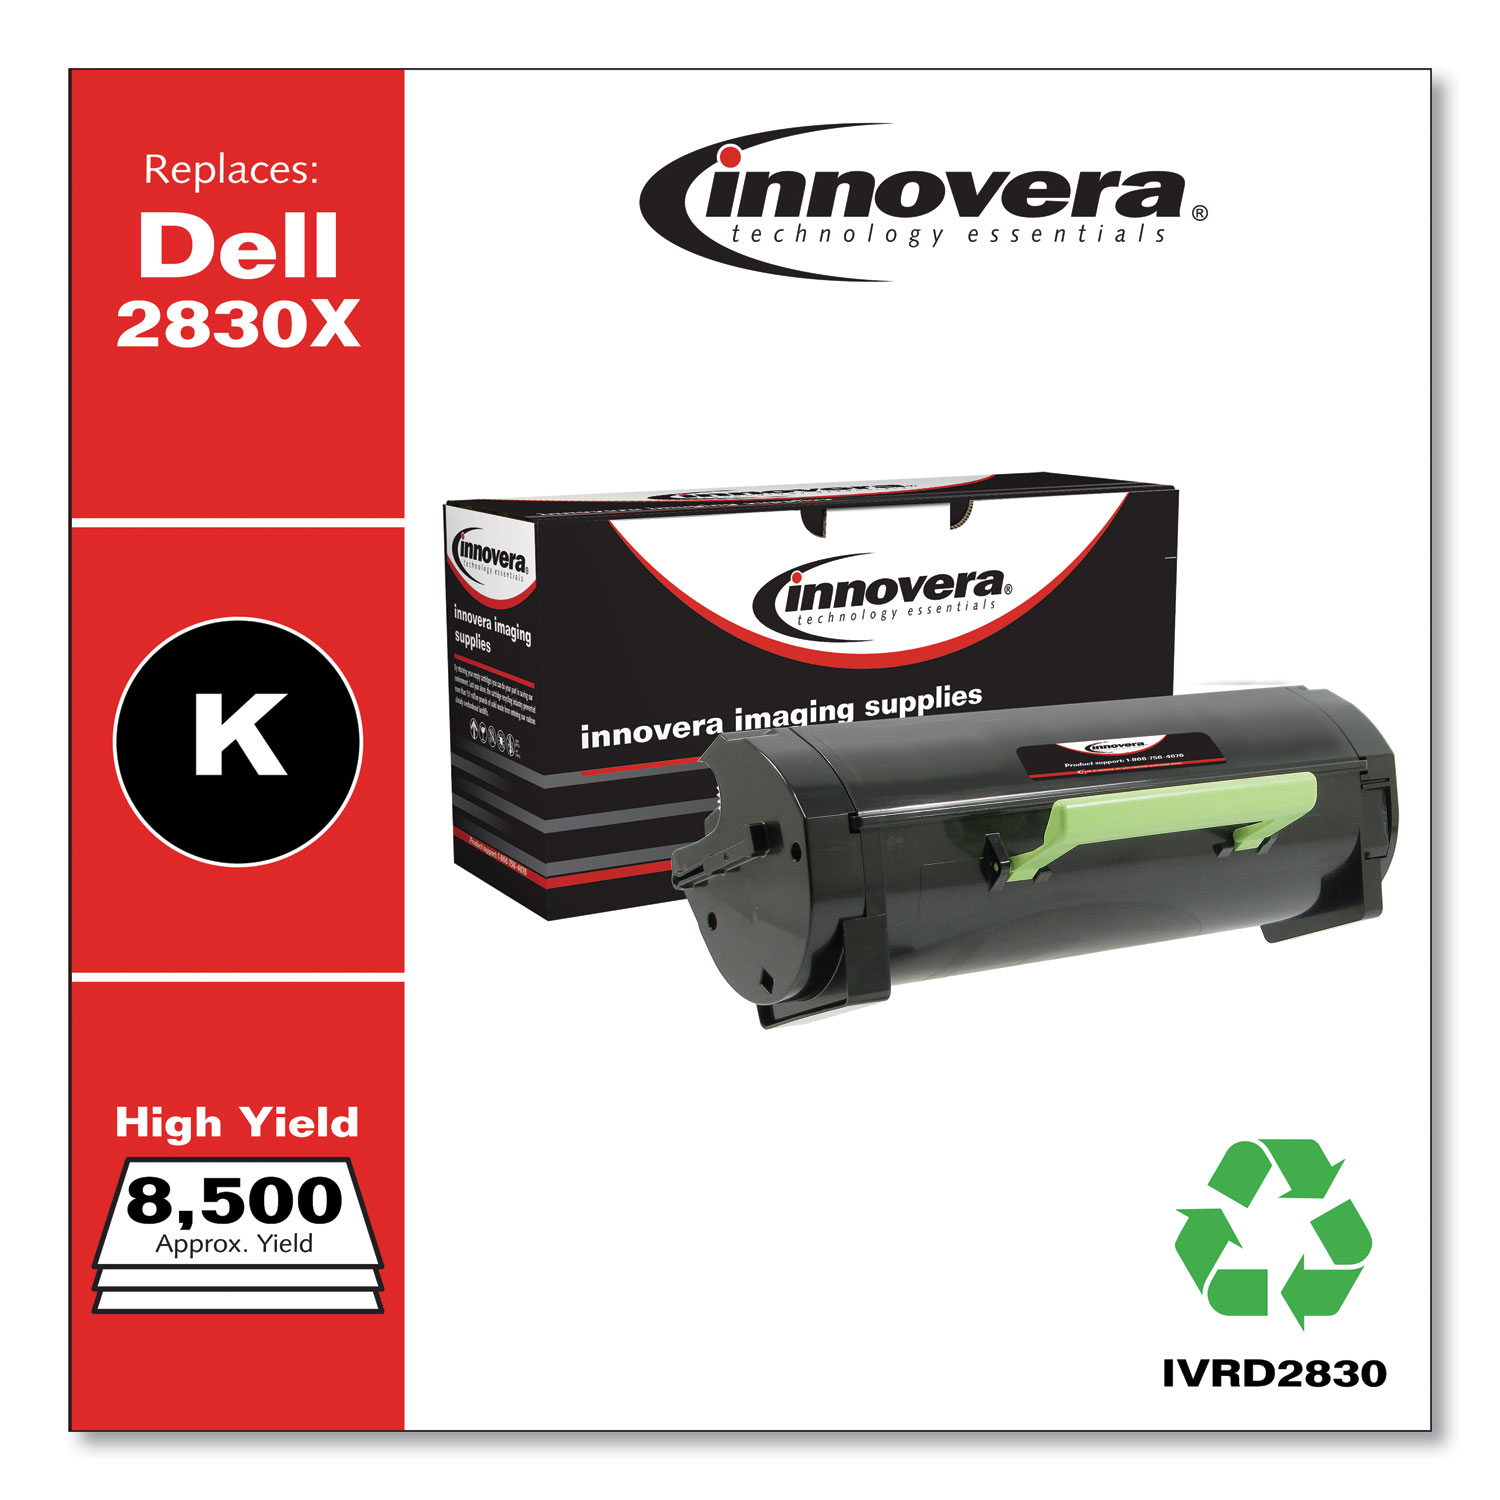  Innovera IVRD2830 Remanufactured S2830DN (S2830) High-Yield Toner, 8500 Page-Yield, Black (IVRD2830) 